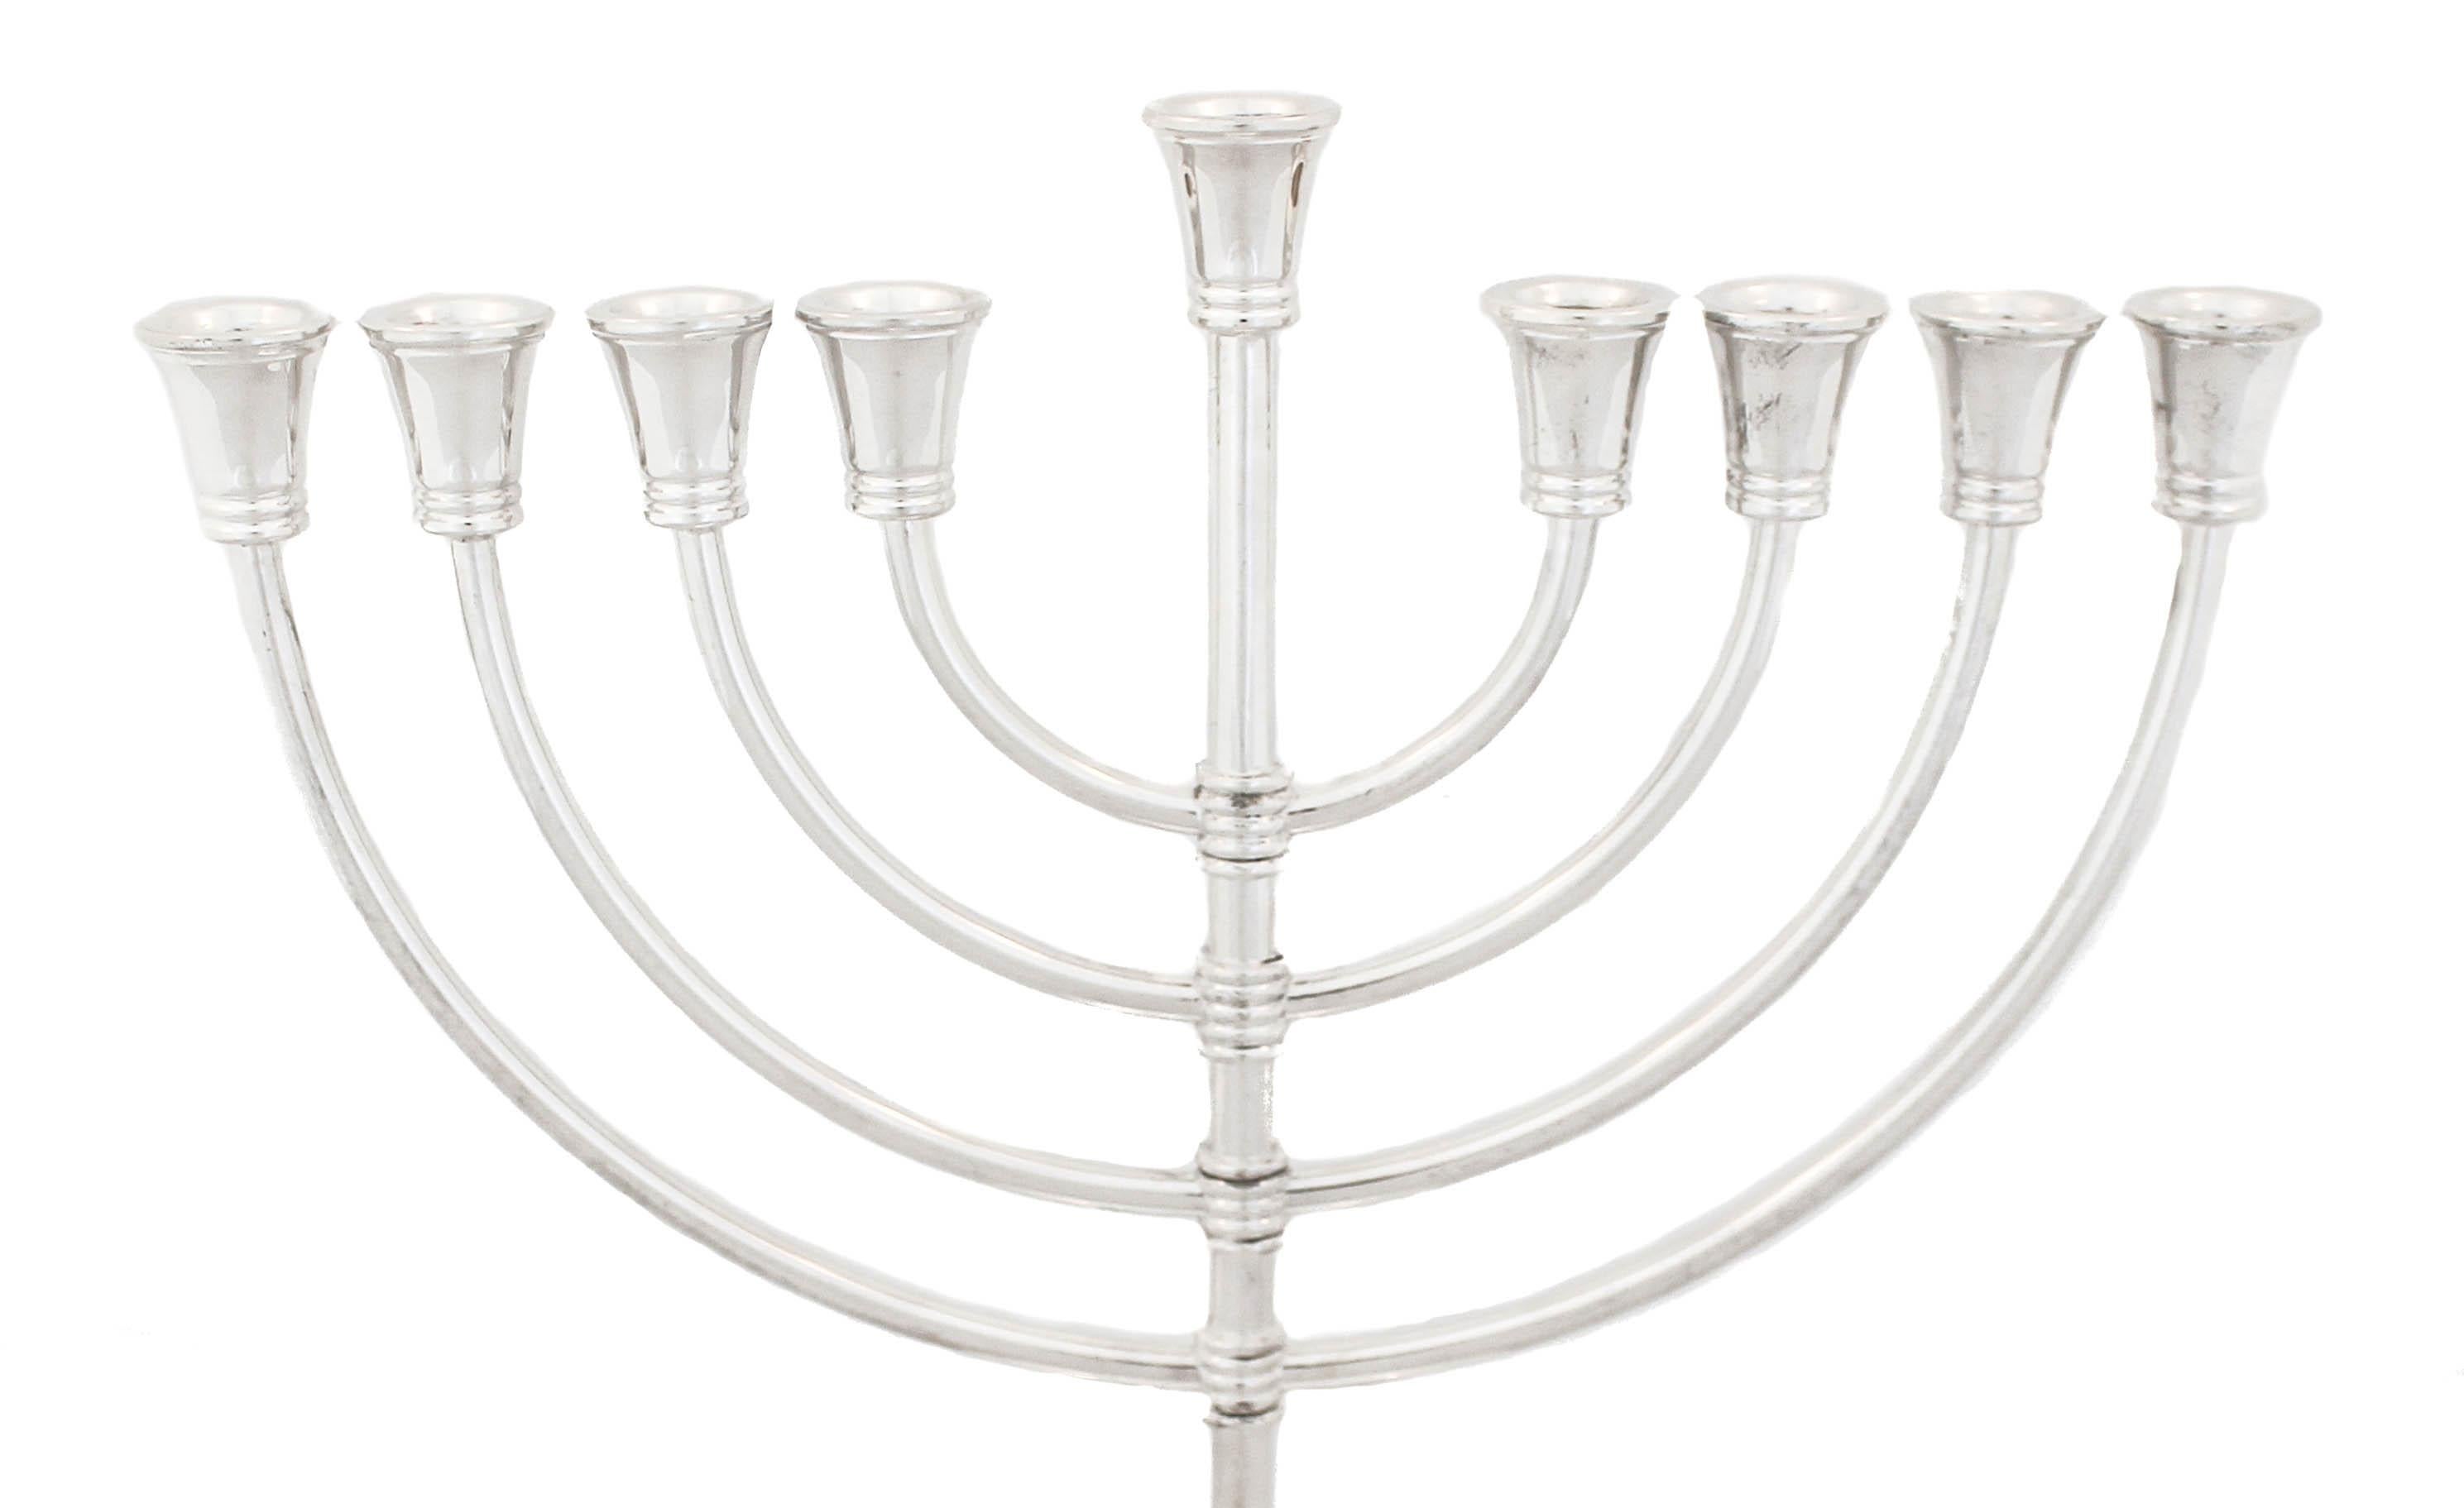 Being offered is a sterling silver menorah.  It has an understated elegance and the craftsmanship is beautiful.  Based on an old Tiffany & Company design, this menorah is the perfect size and look for any contemporary home setting.  The sleek round